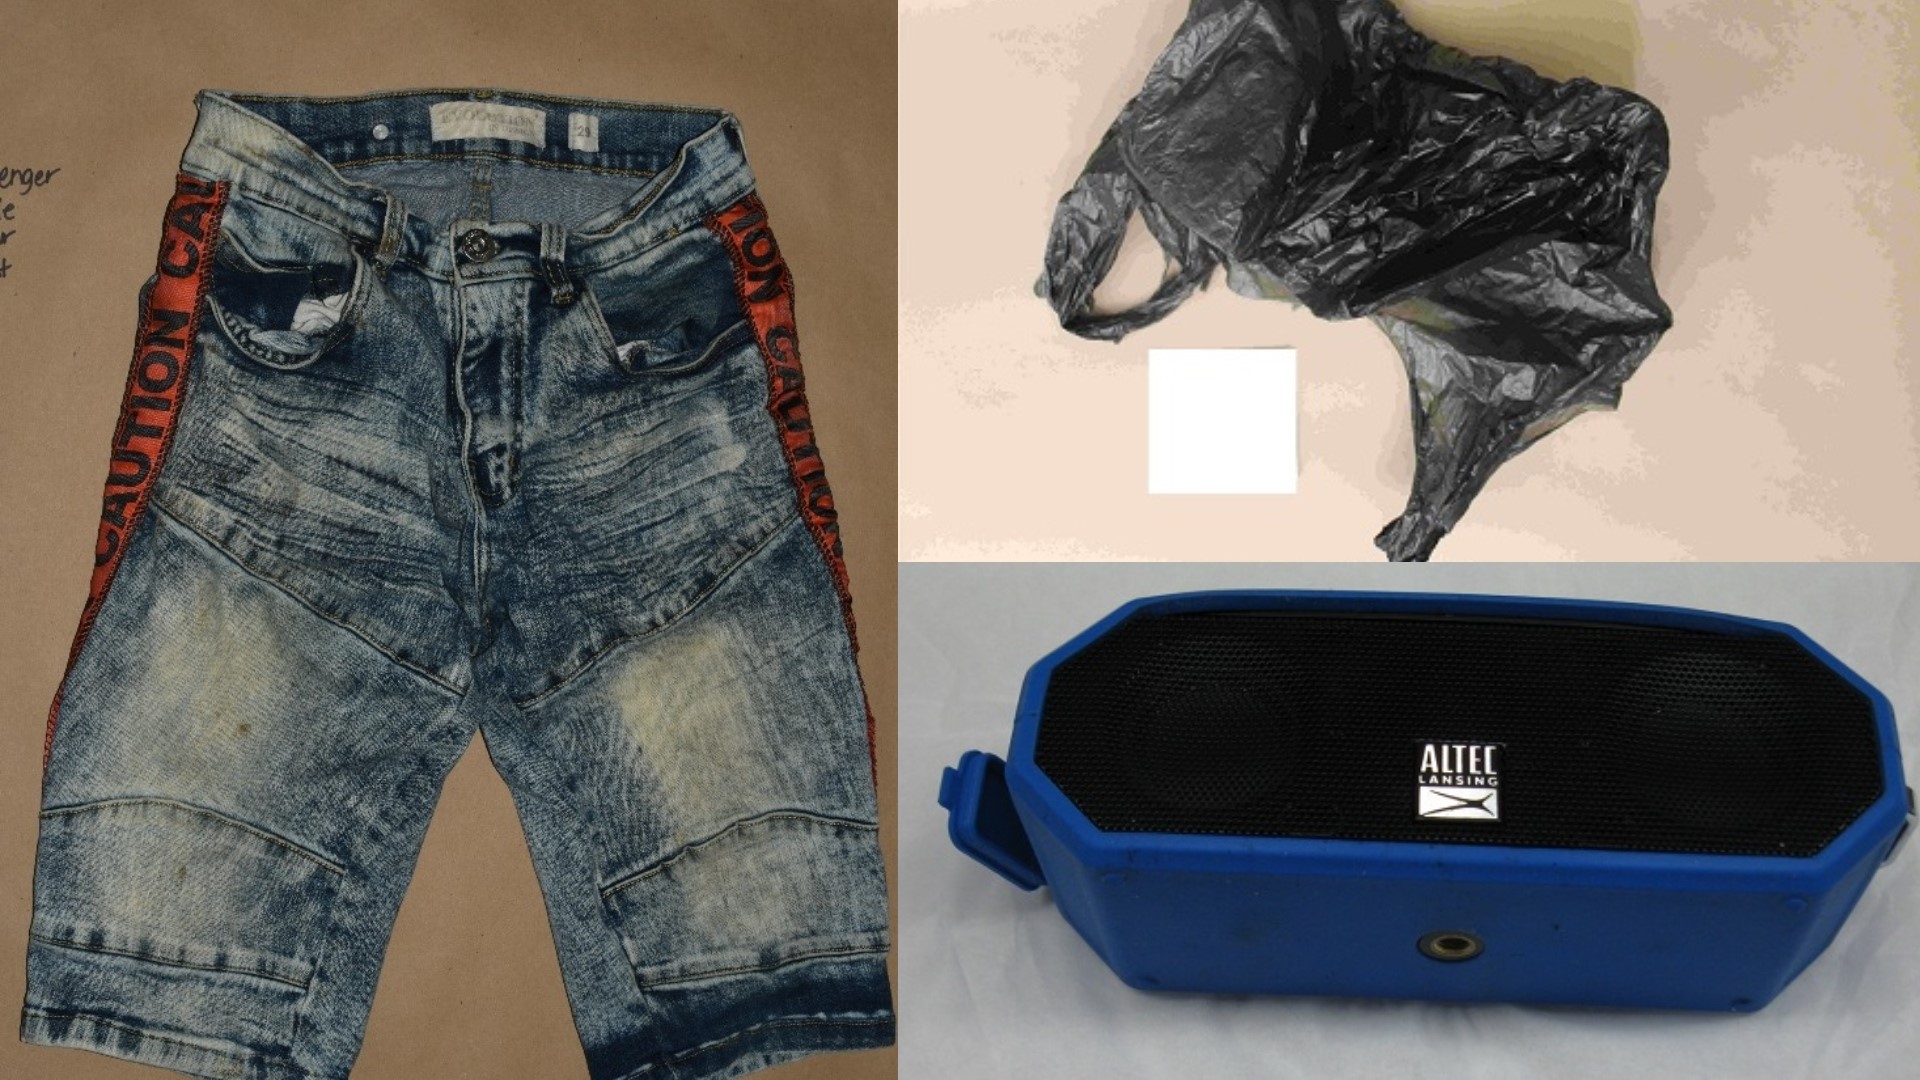 Police have released new images of belongings they said the suspect who took 1-year-old Blaise Barnett may have left behind.